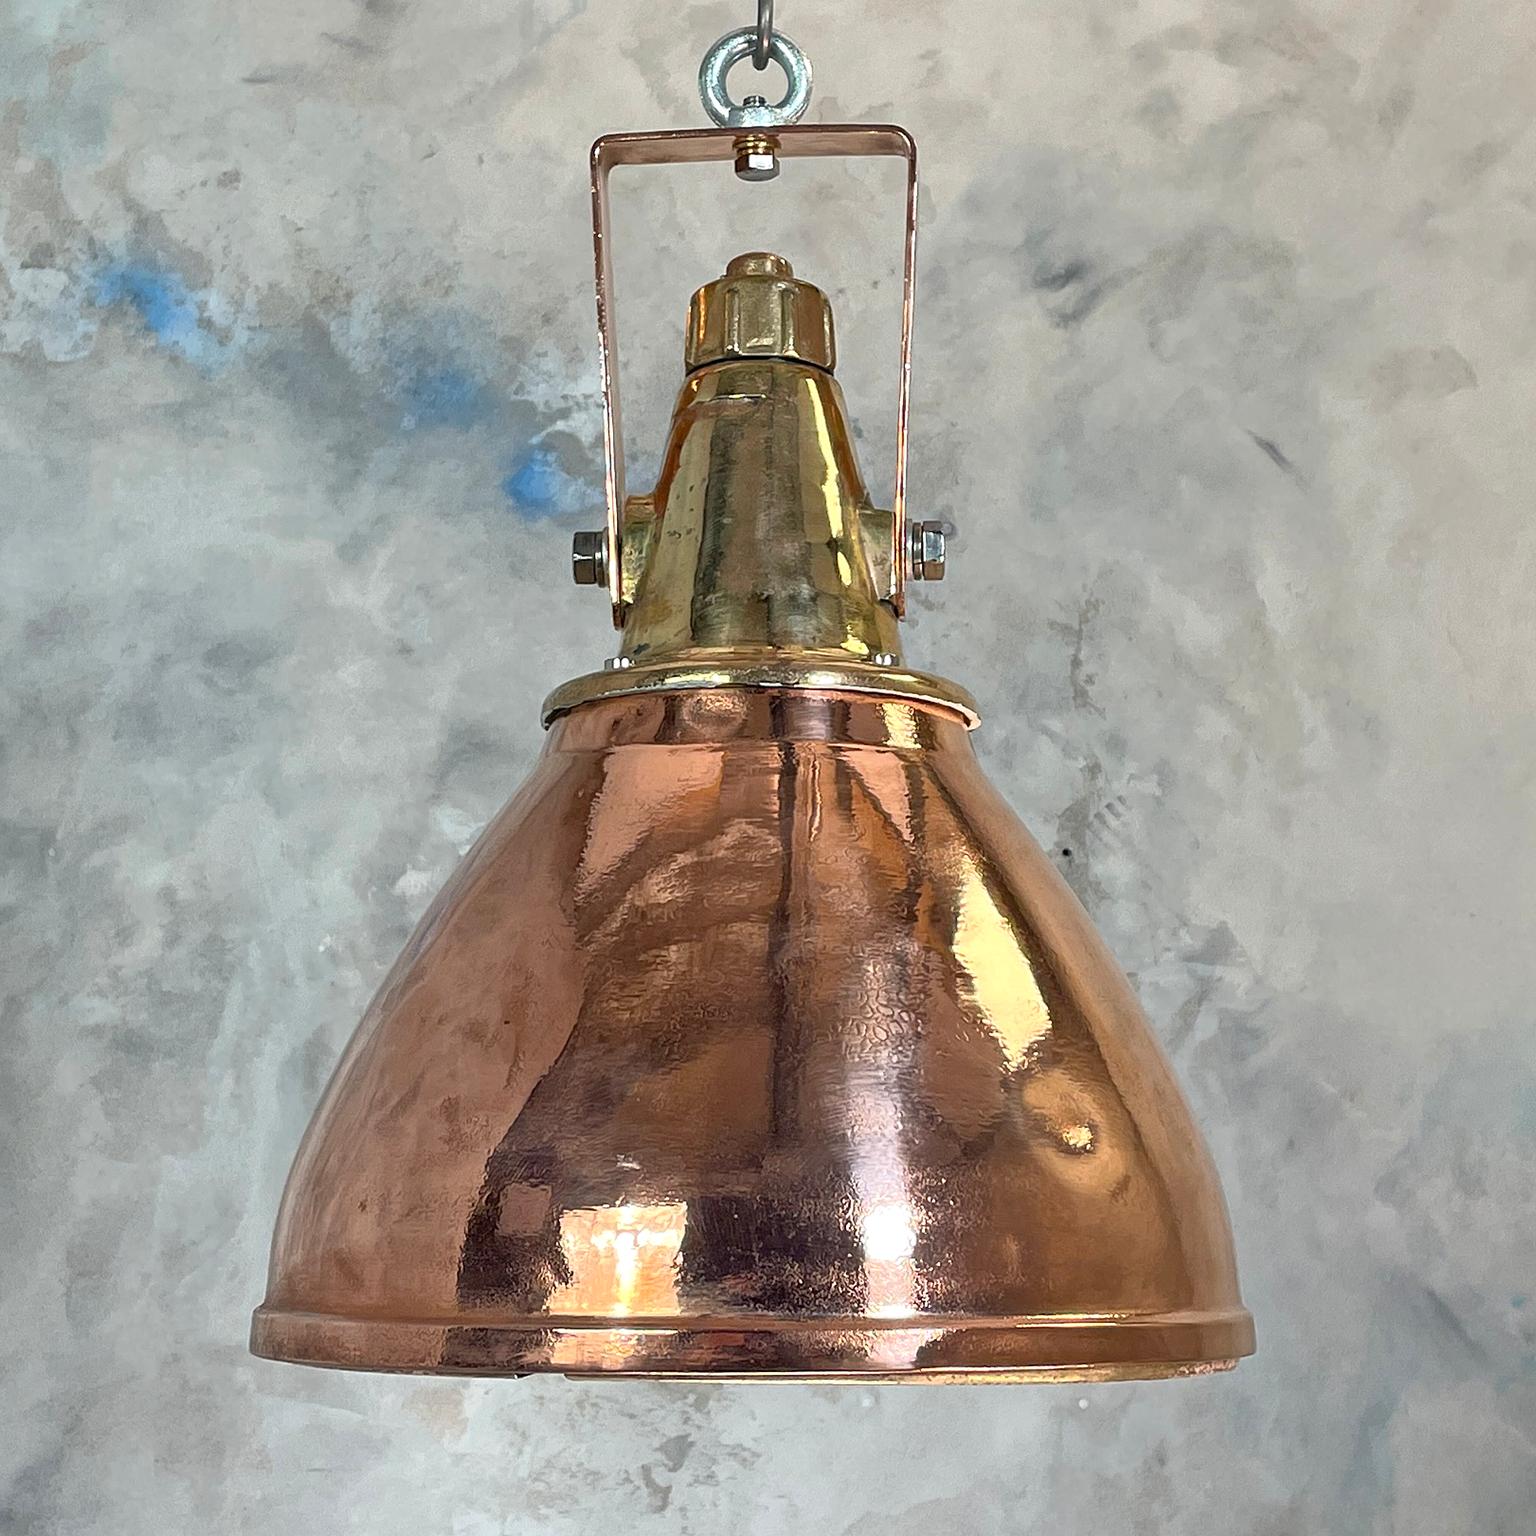 A copper and brass ceiling pendant light made in Germany in the 1970s originally for industrial use on cargo ships and sea going vessels.

The dome is made from spun brass with a cast brass top, behind the glass there is an aluminium reflector to